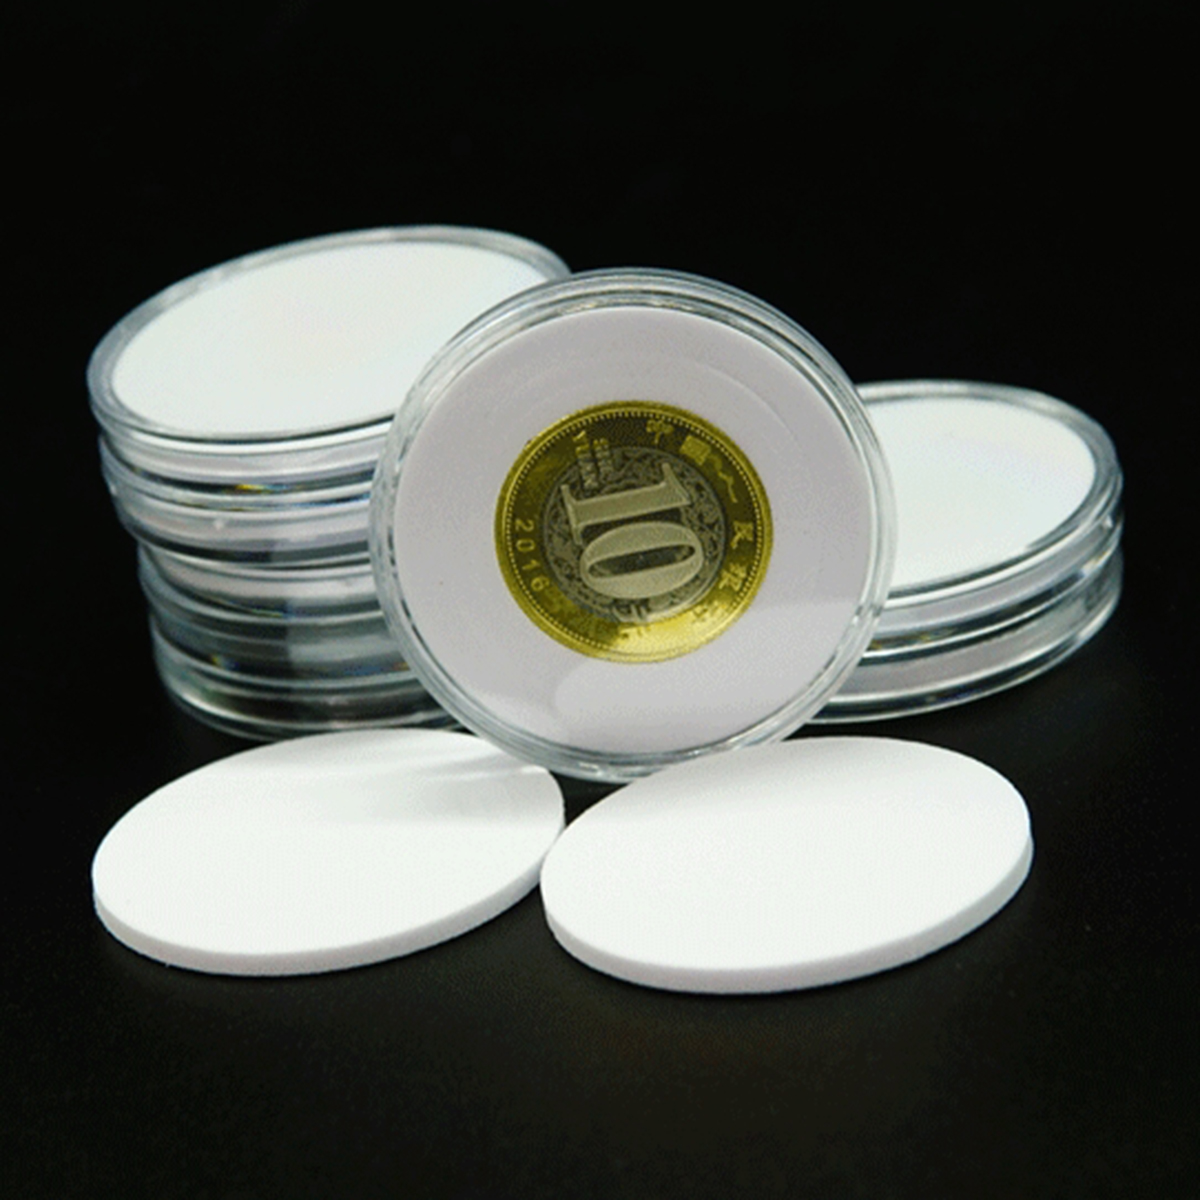 20pcs-Applied-Mint-Coin-Display-Holder-Storage-Boxes-Capsules-Protector-20-40mm-1254233-2